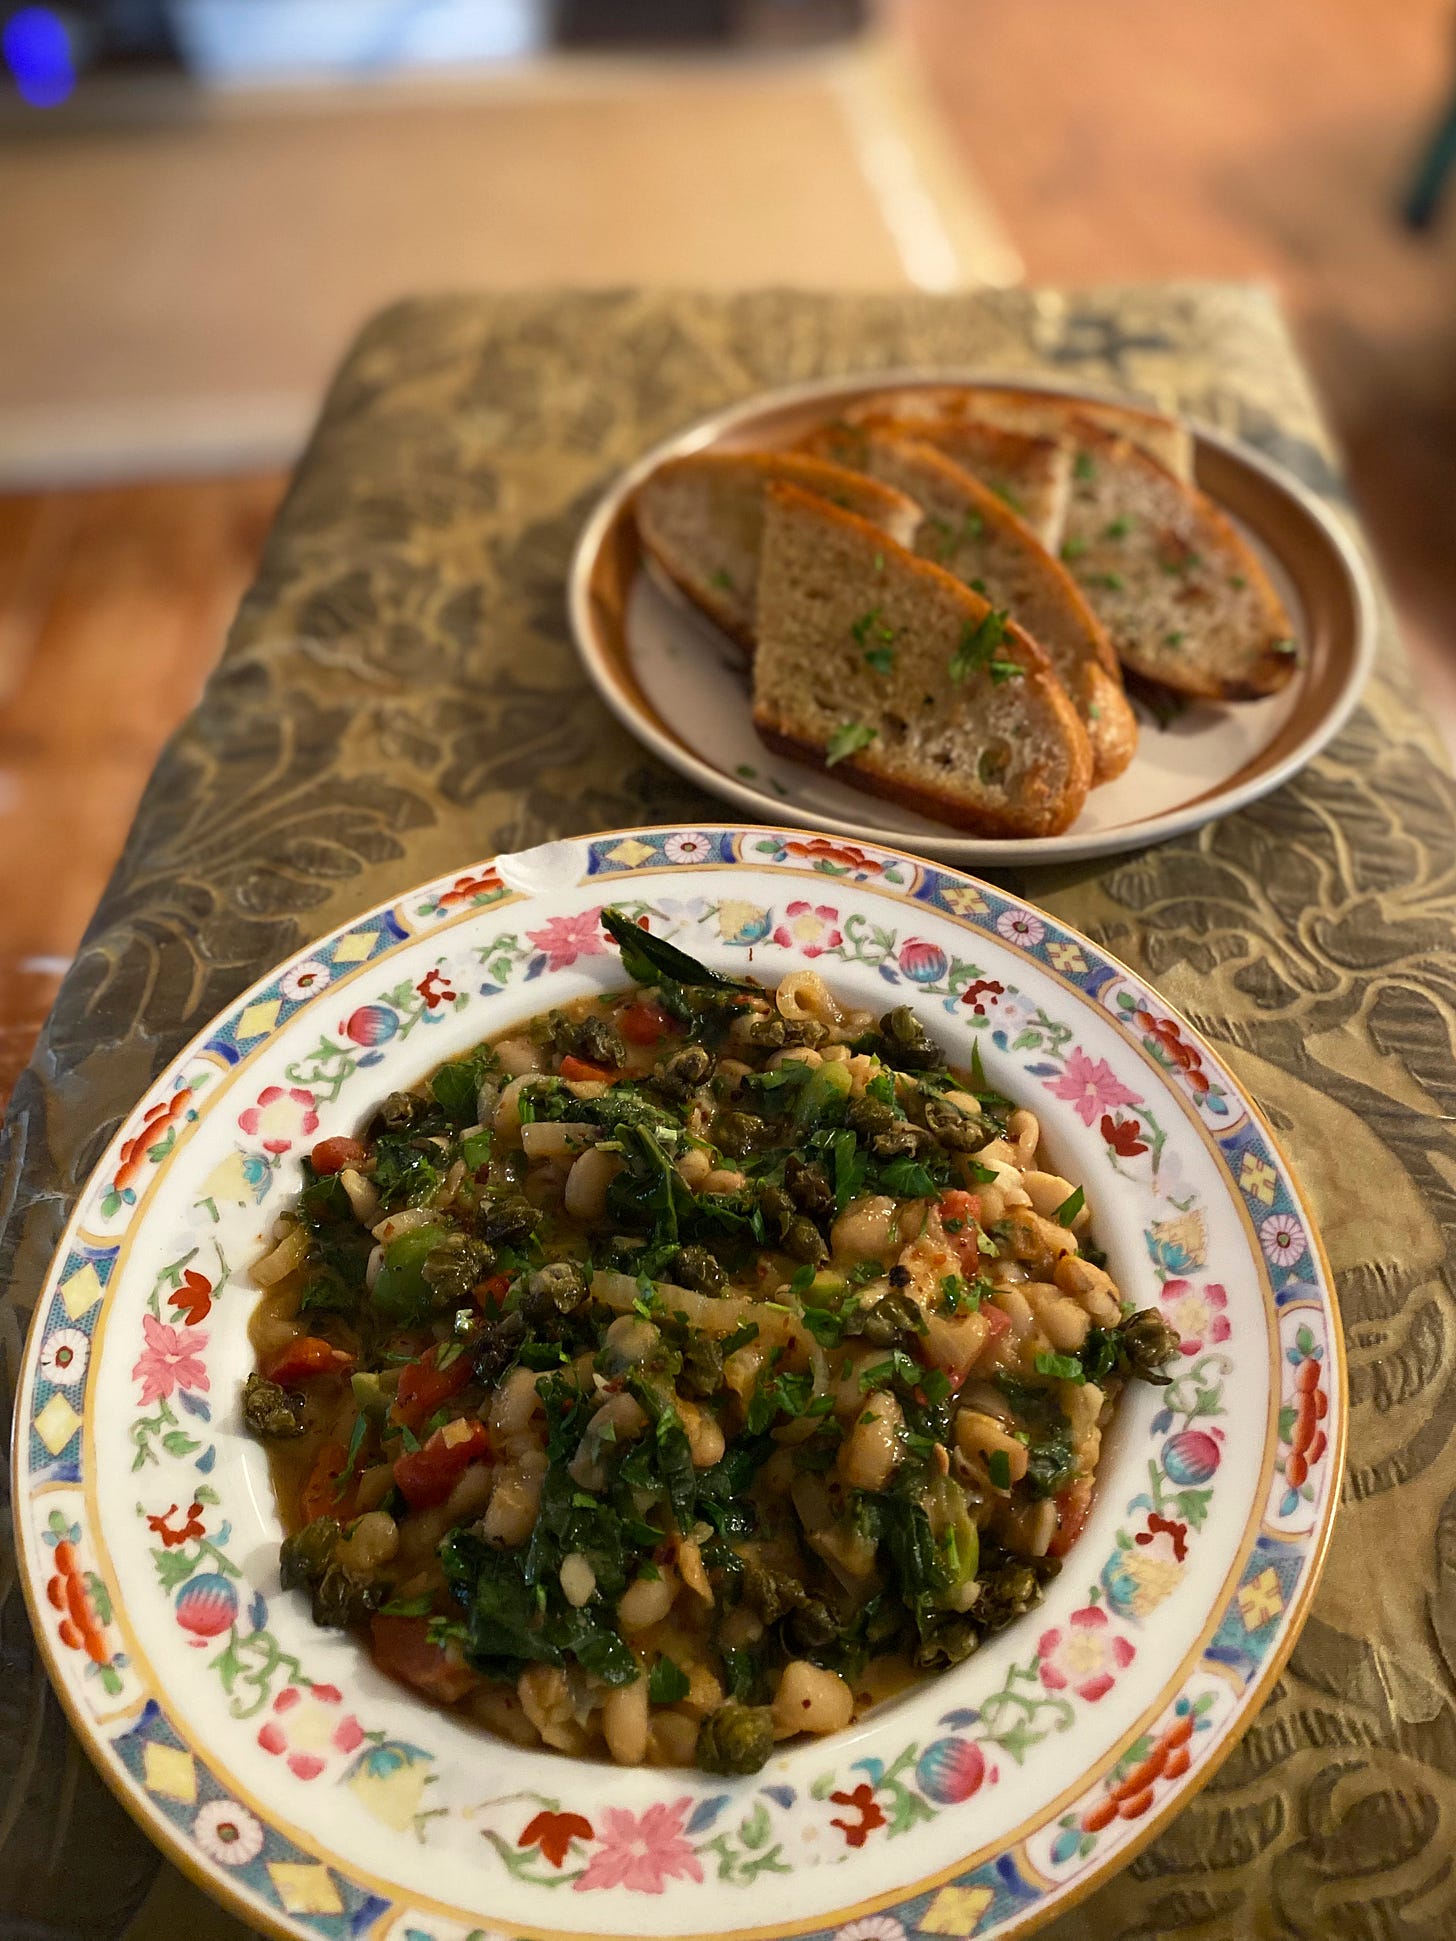 A decorated shallow bowl filled with the kale, white bean, pepper, & olive mix described above. Capers and parsley are scattered over the top. Behind it, on a mismatched small plate, slices of bread are cut in half and sprinkled with parsley.